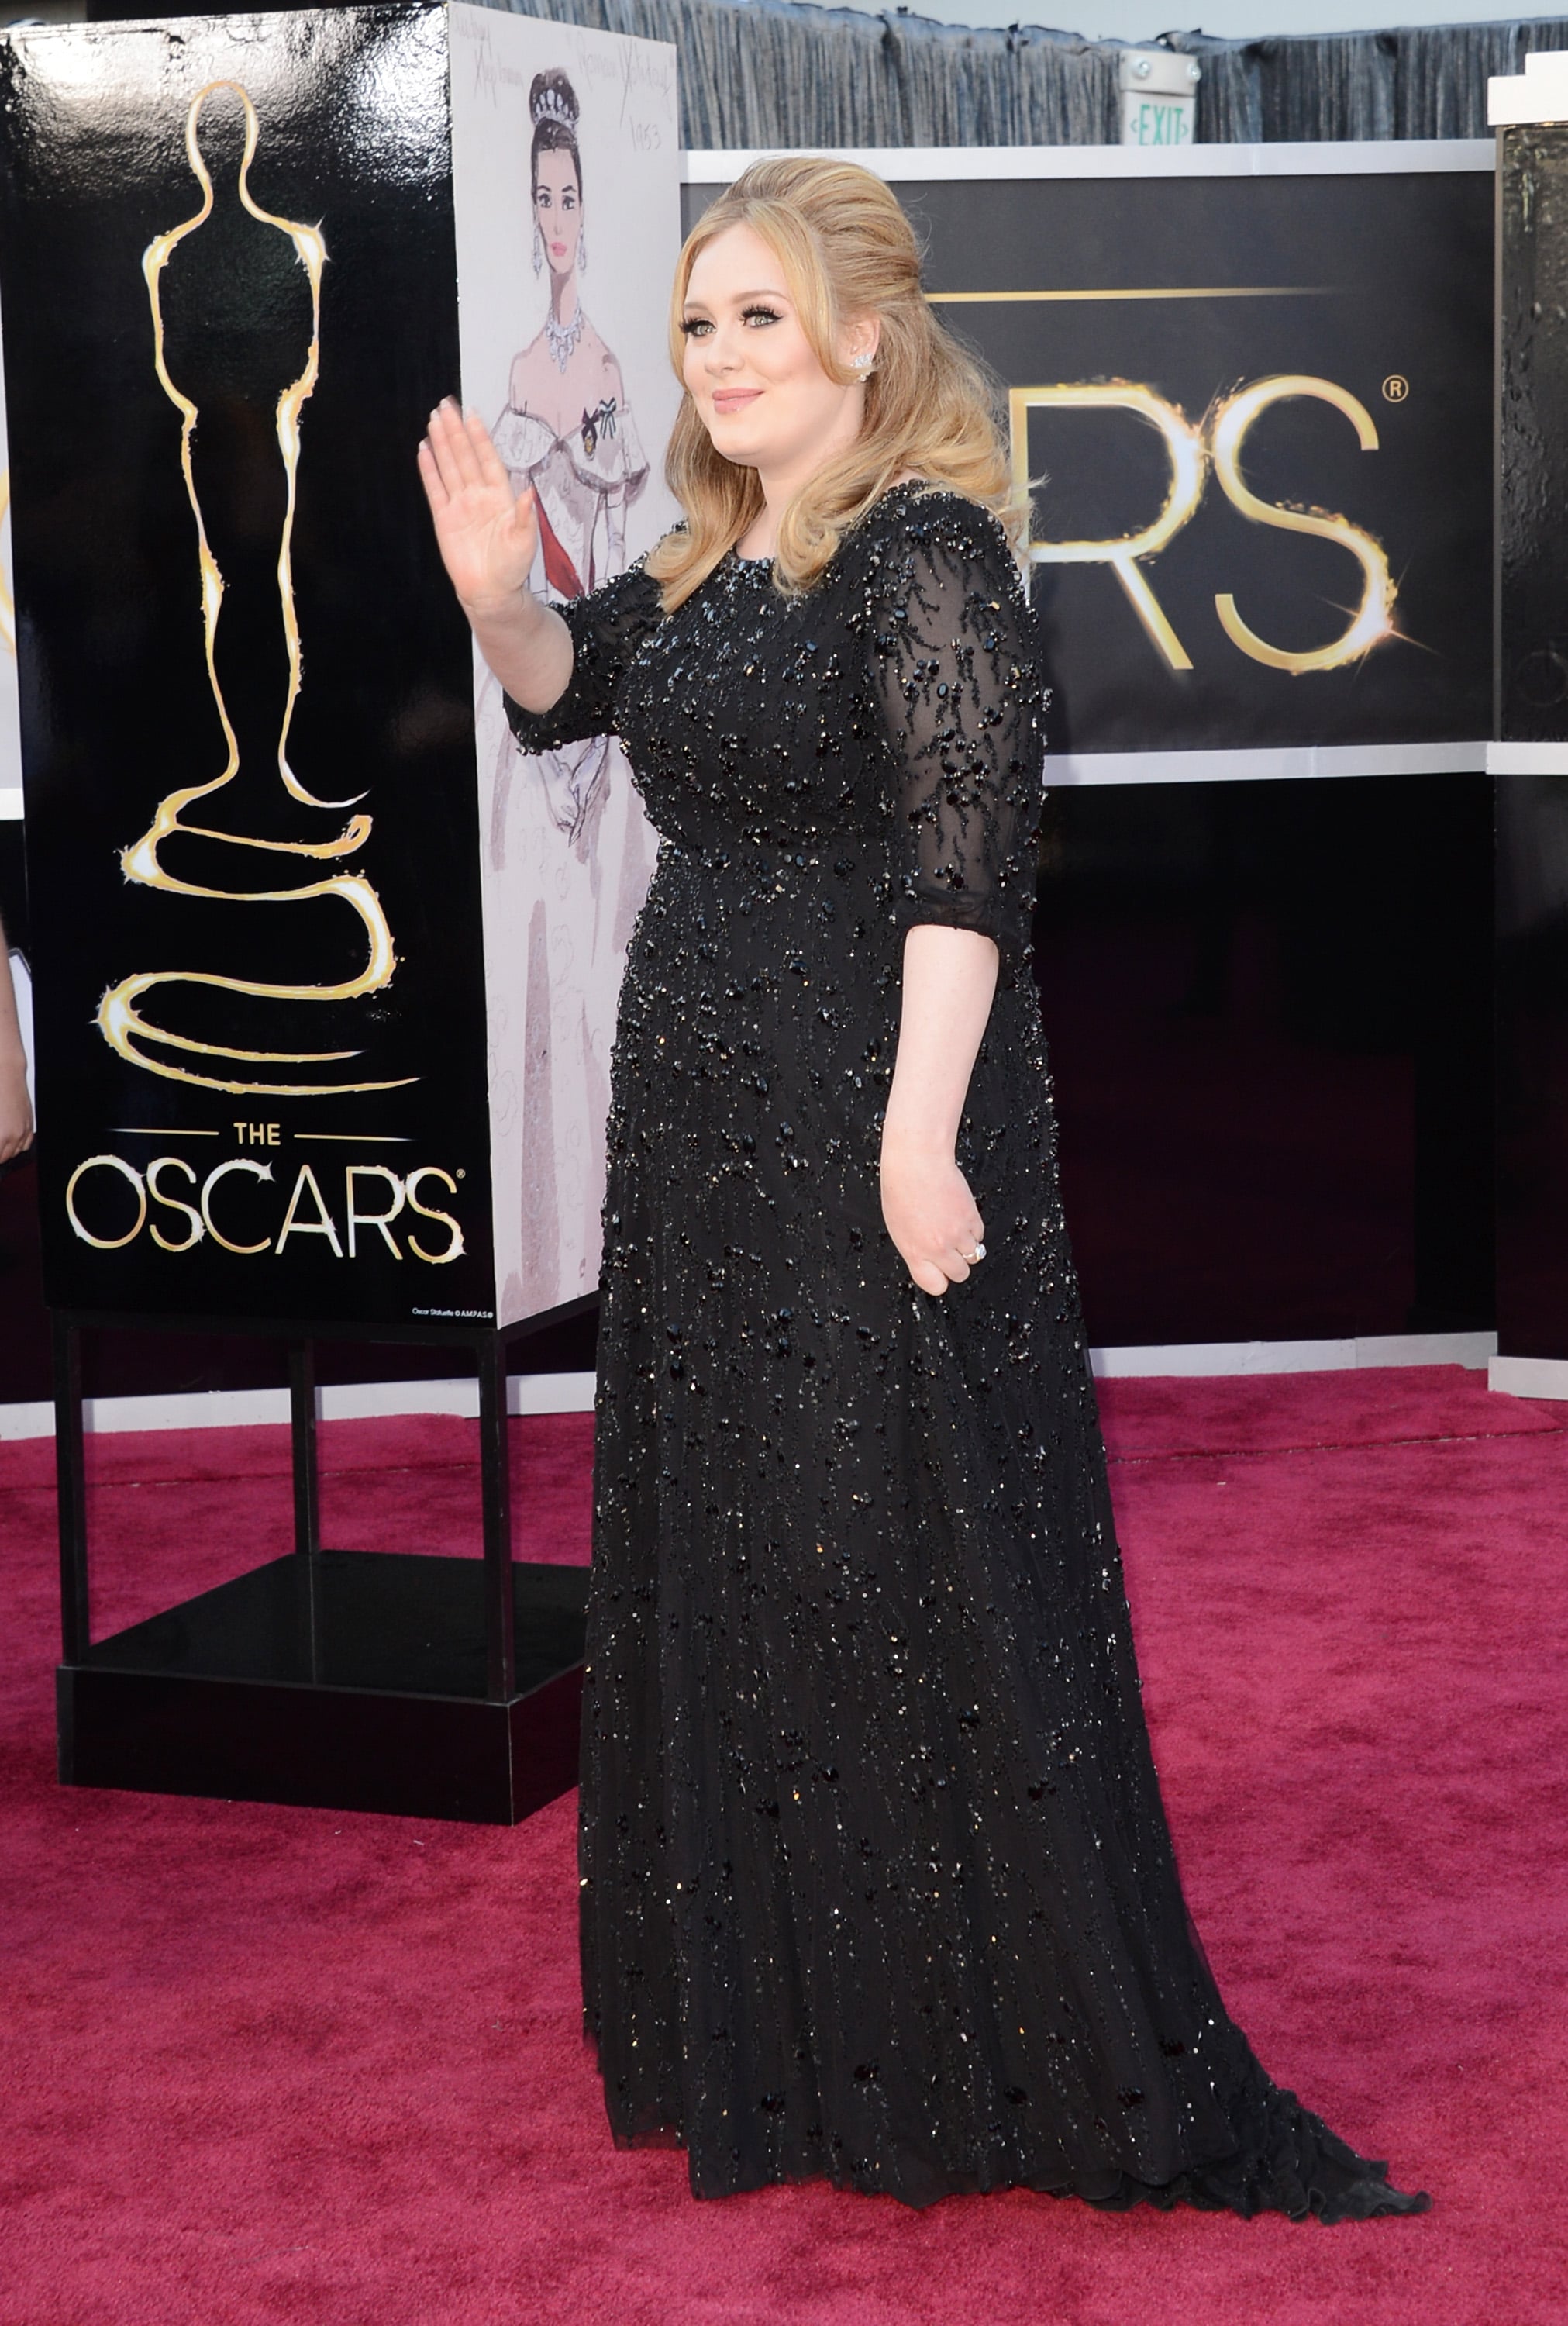 Adele on the red carpet at the Oscars 2013. | The Ultimate 2013 Oscar ...